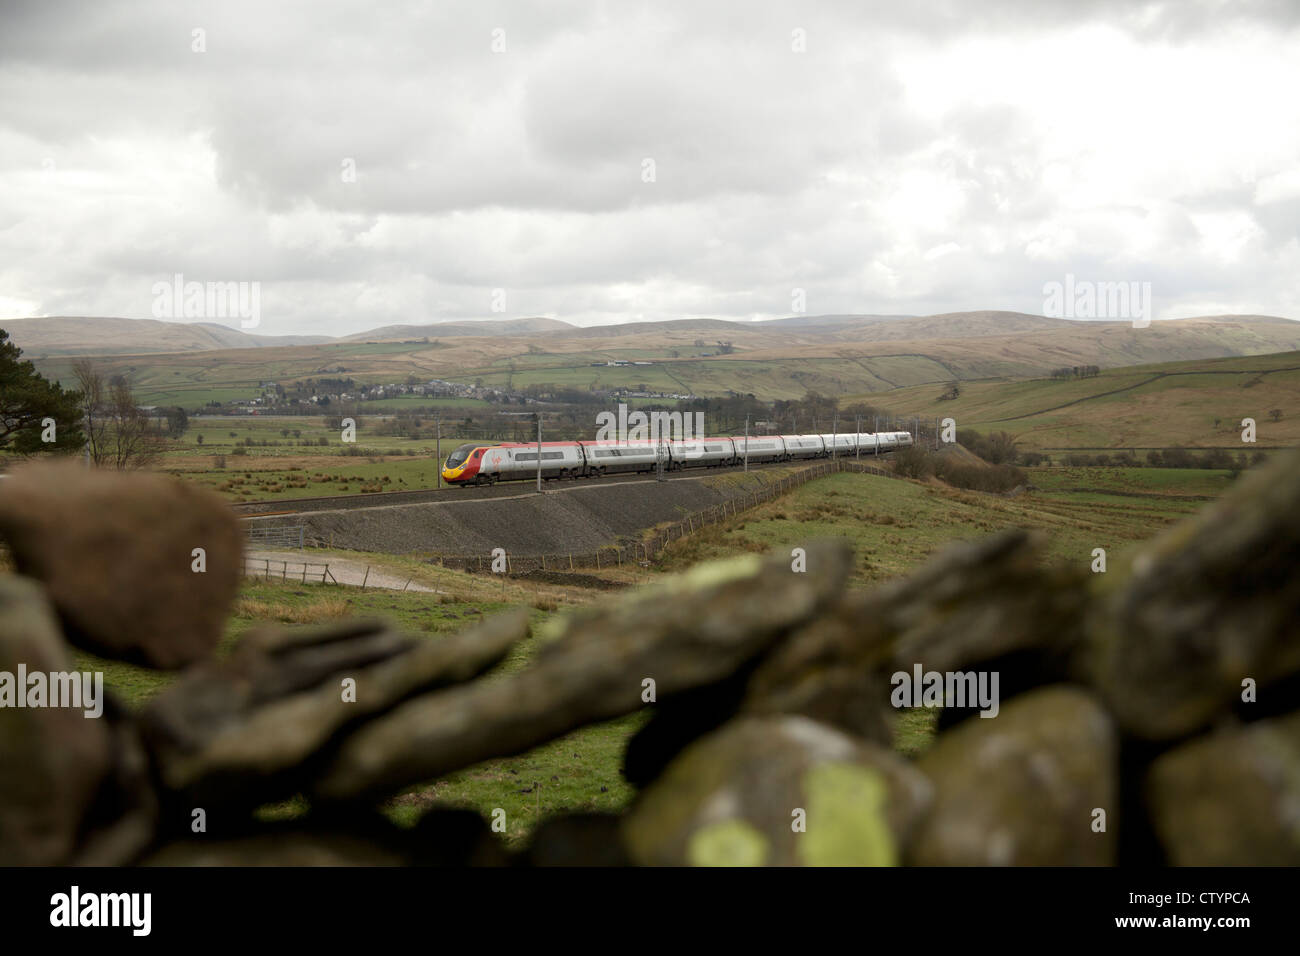 Virgin trains Pendolino train climbs the Cumbria/Westmoreland Shap hills at Greenholme, Tebay with a Glasgow bound train. Stock Photo